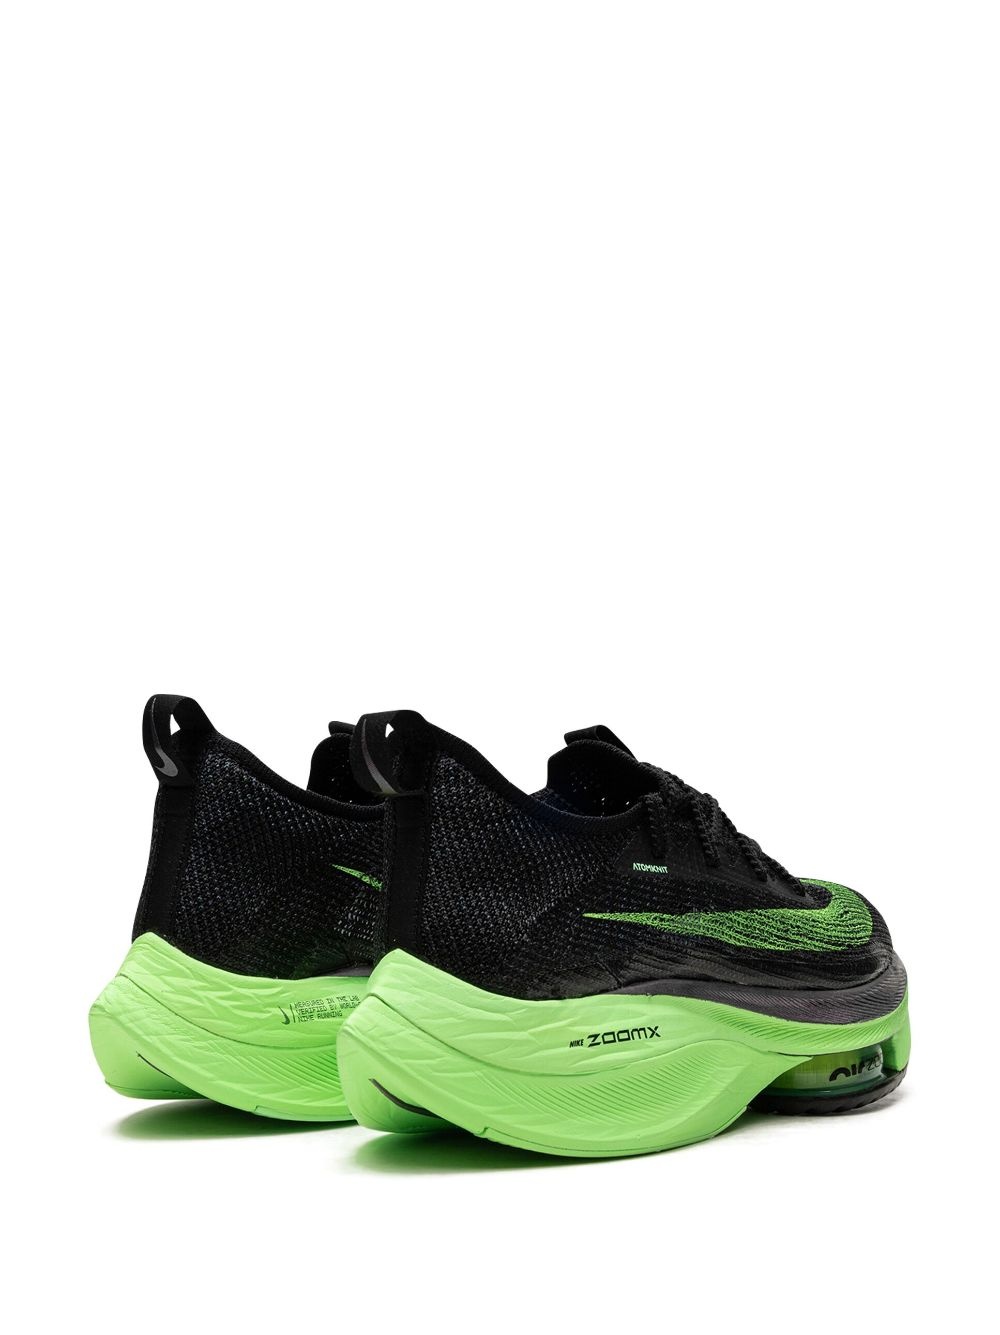 Air Zoom Alphafly Next% sneakers - 3